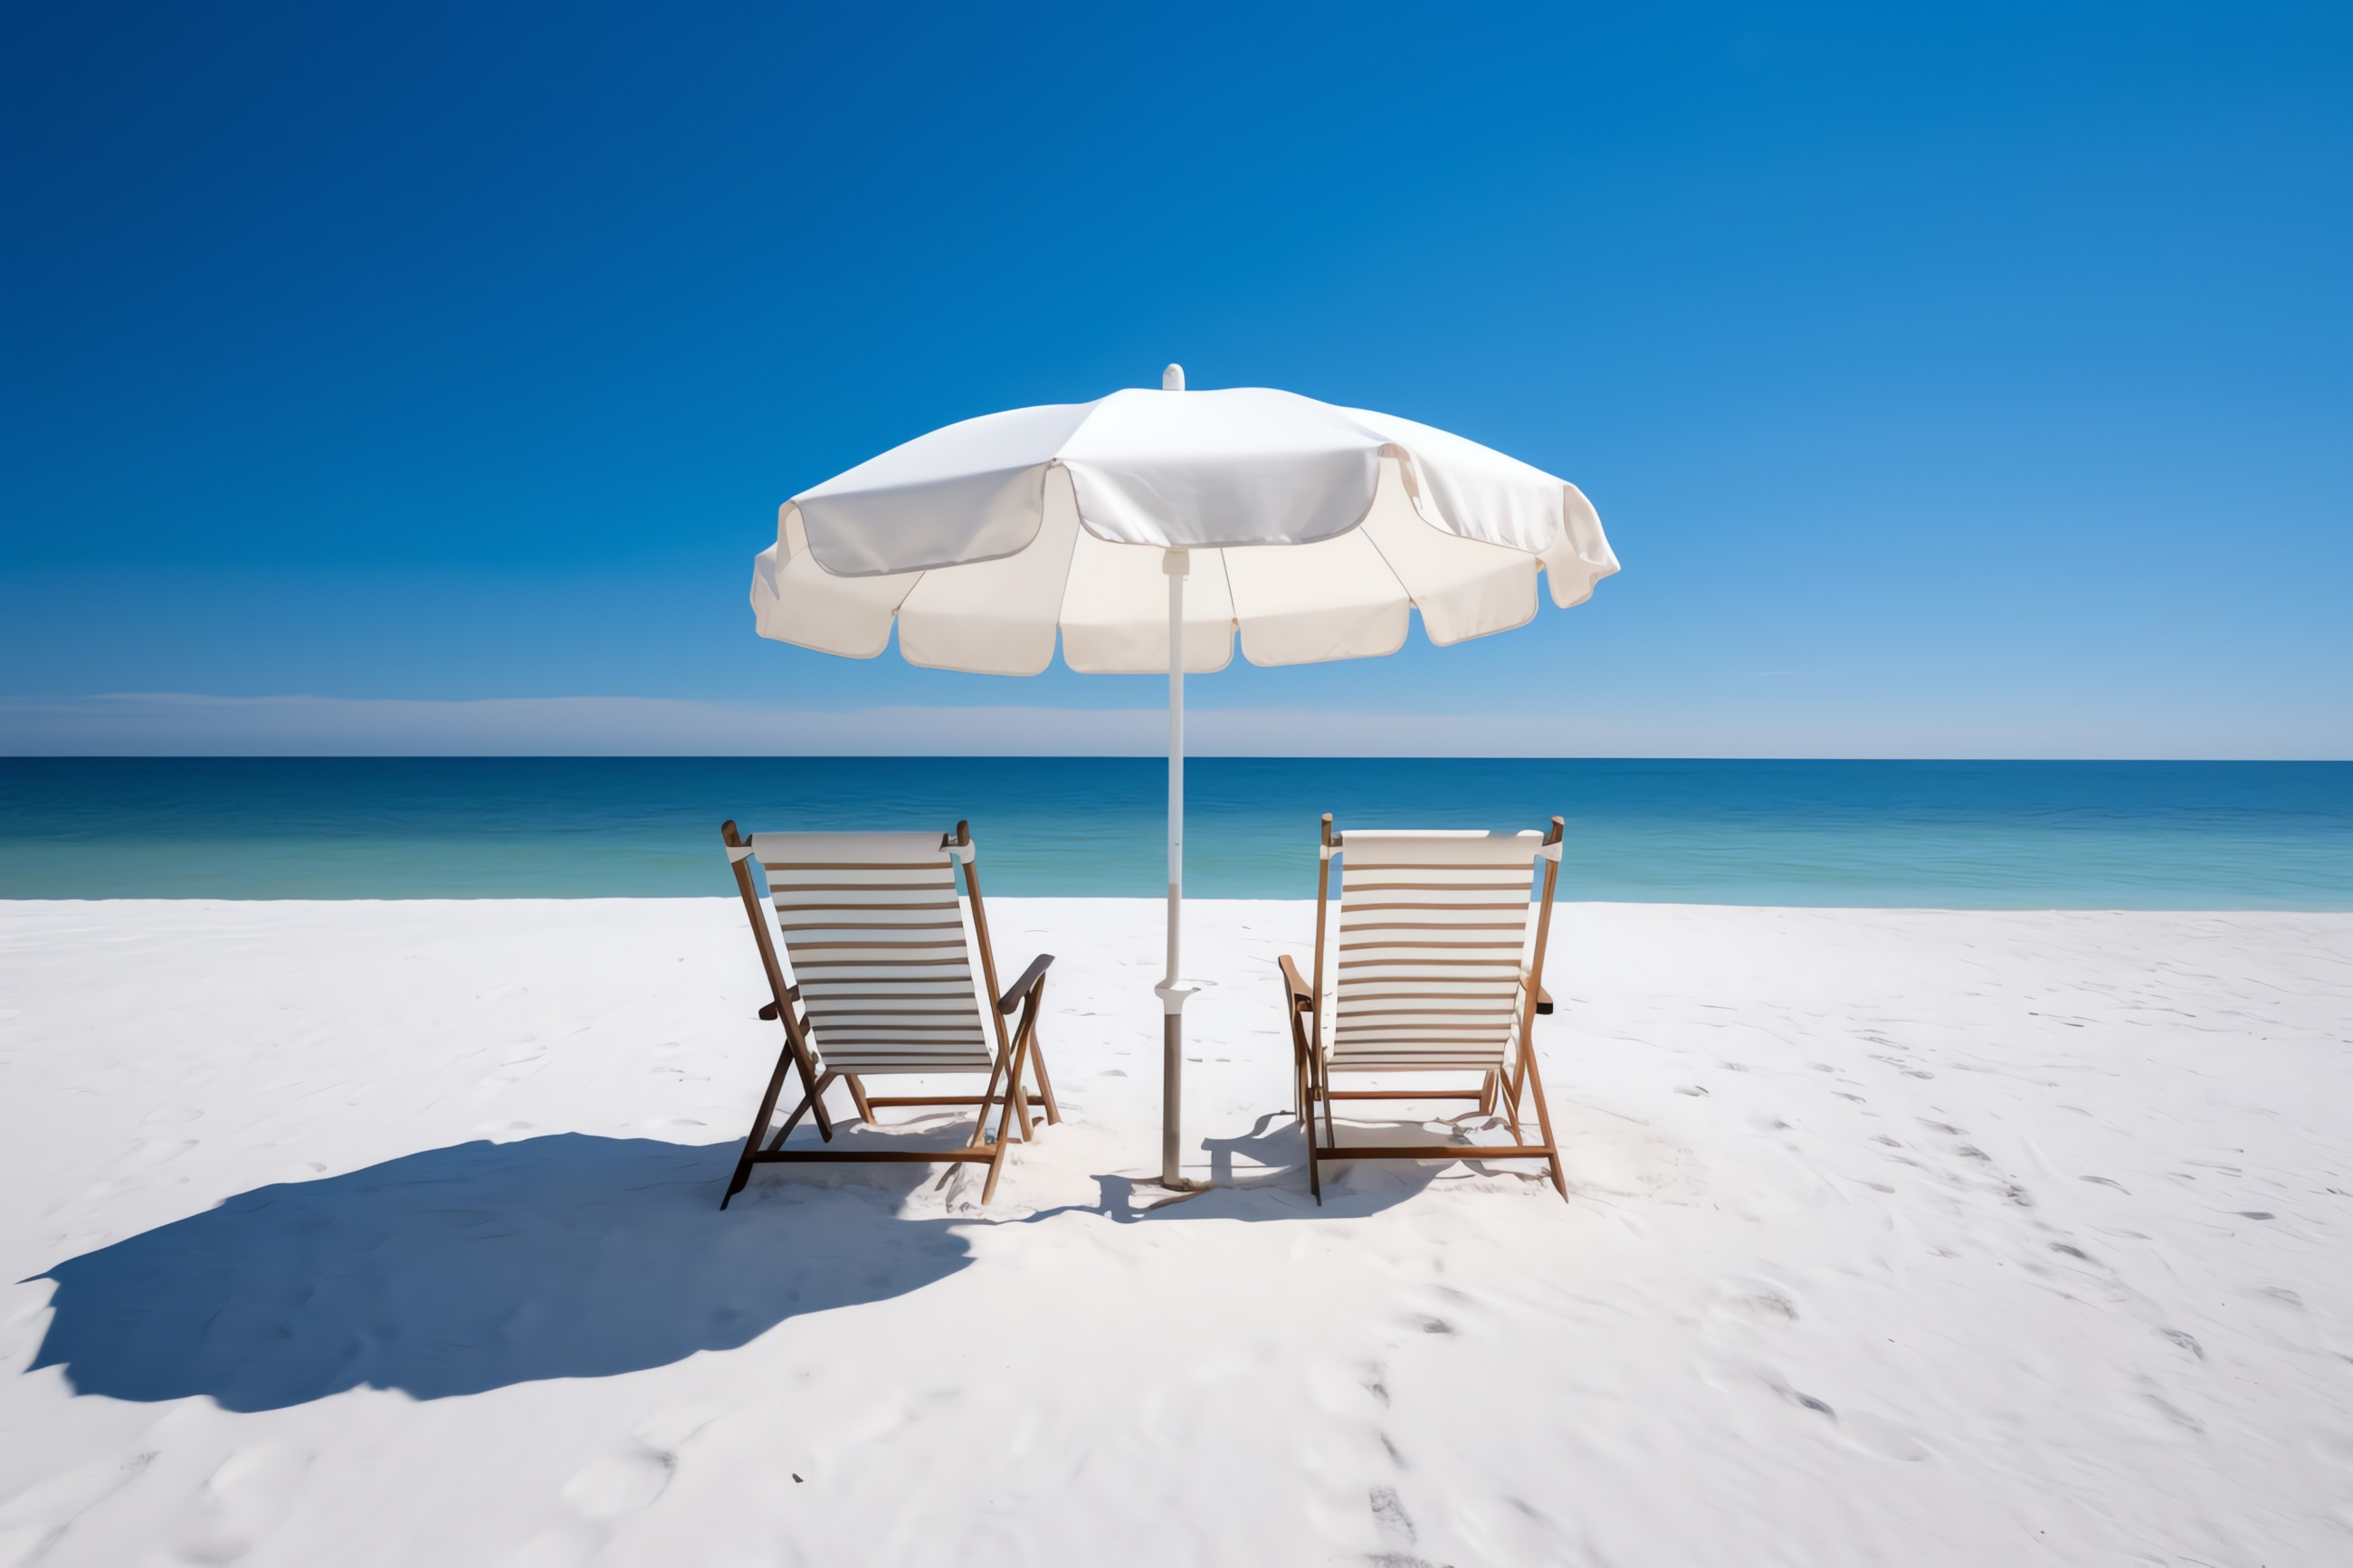 Two beach chairs and an umbrella on a sandy beach, overlooking the sparkling blue water